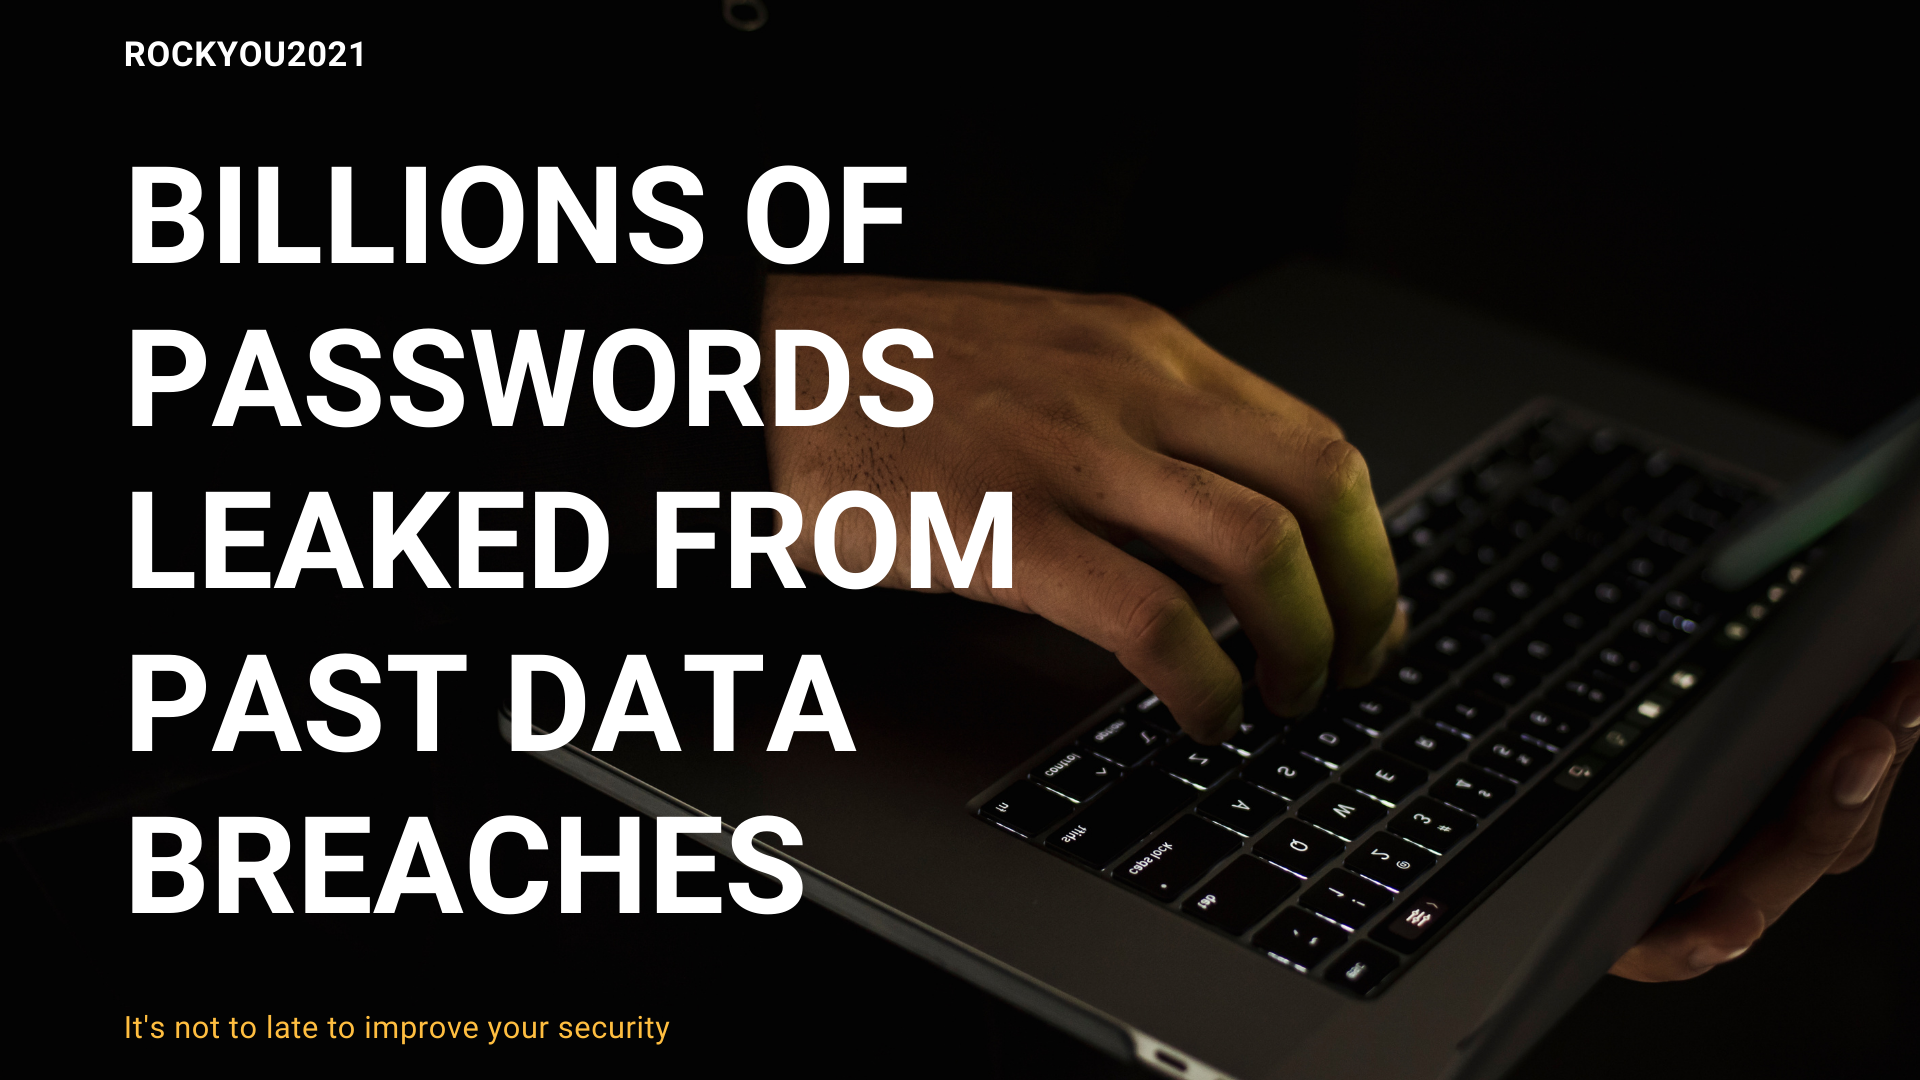 Billions of passwords leaked from past data breaches Digital